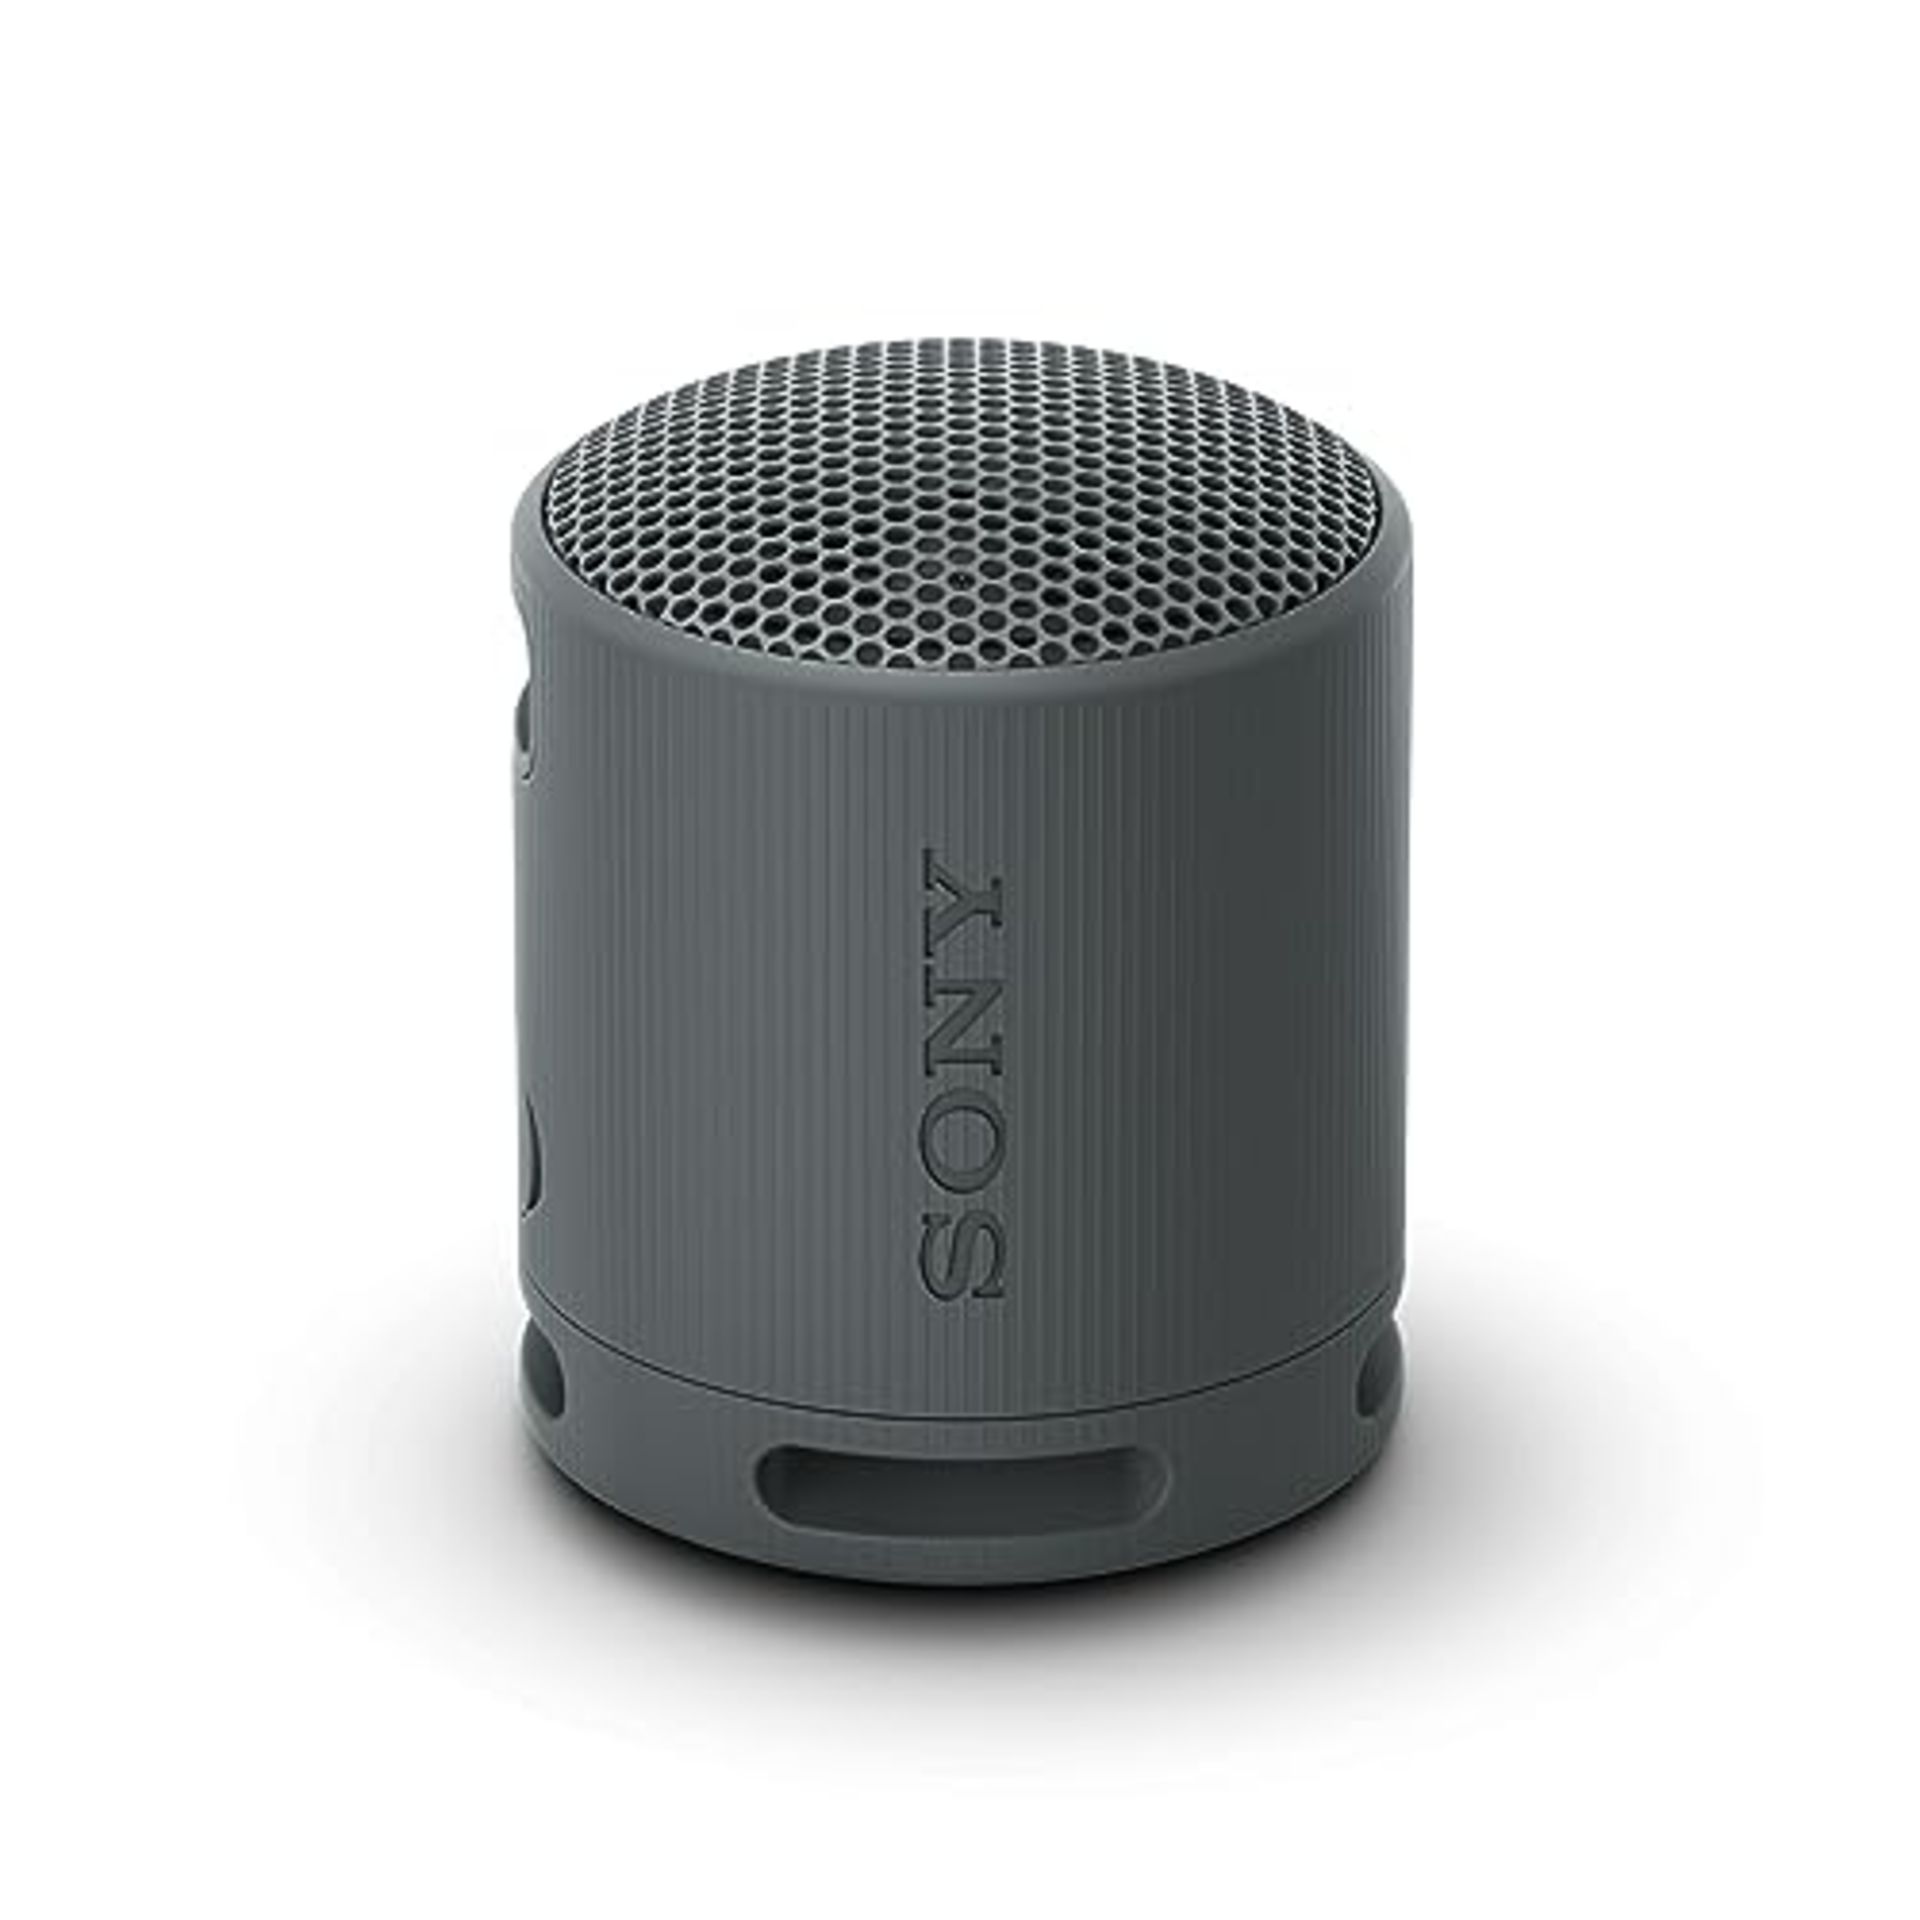 Sony SRS-XB100 - Wireless Bluetooth Speaker, Portable, Lightweight, Compact, Durable, - Image 4 of 6